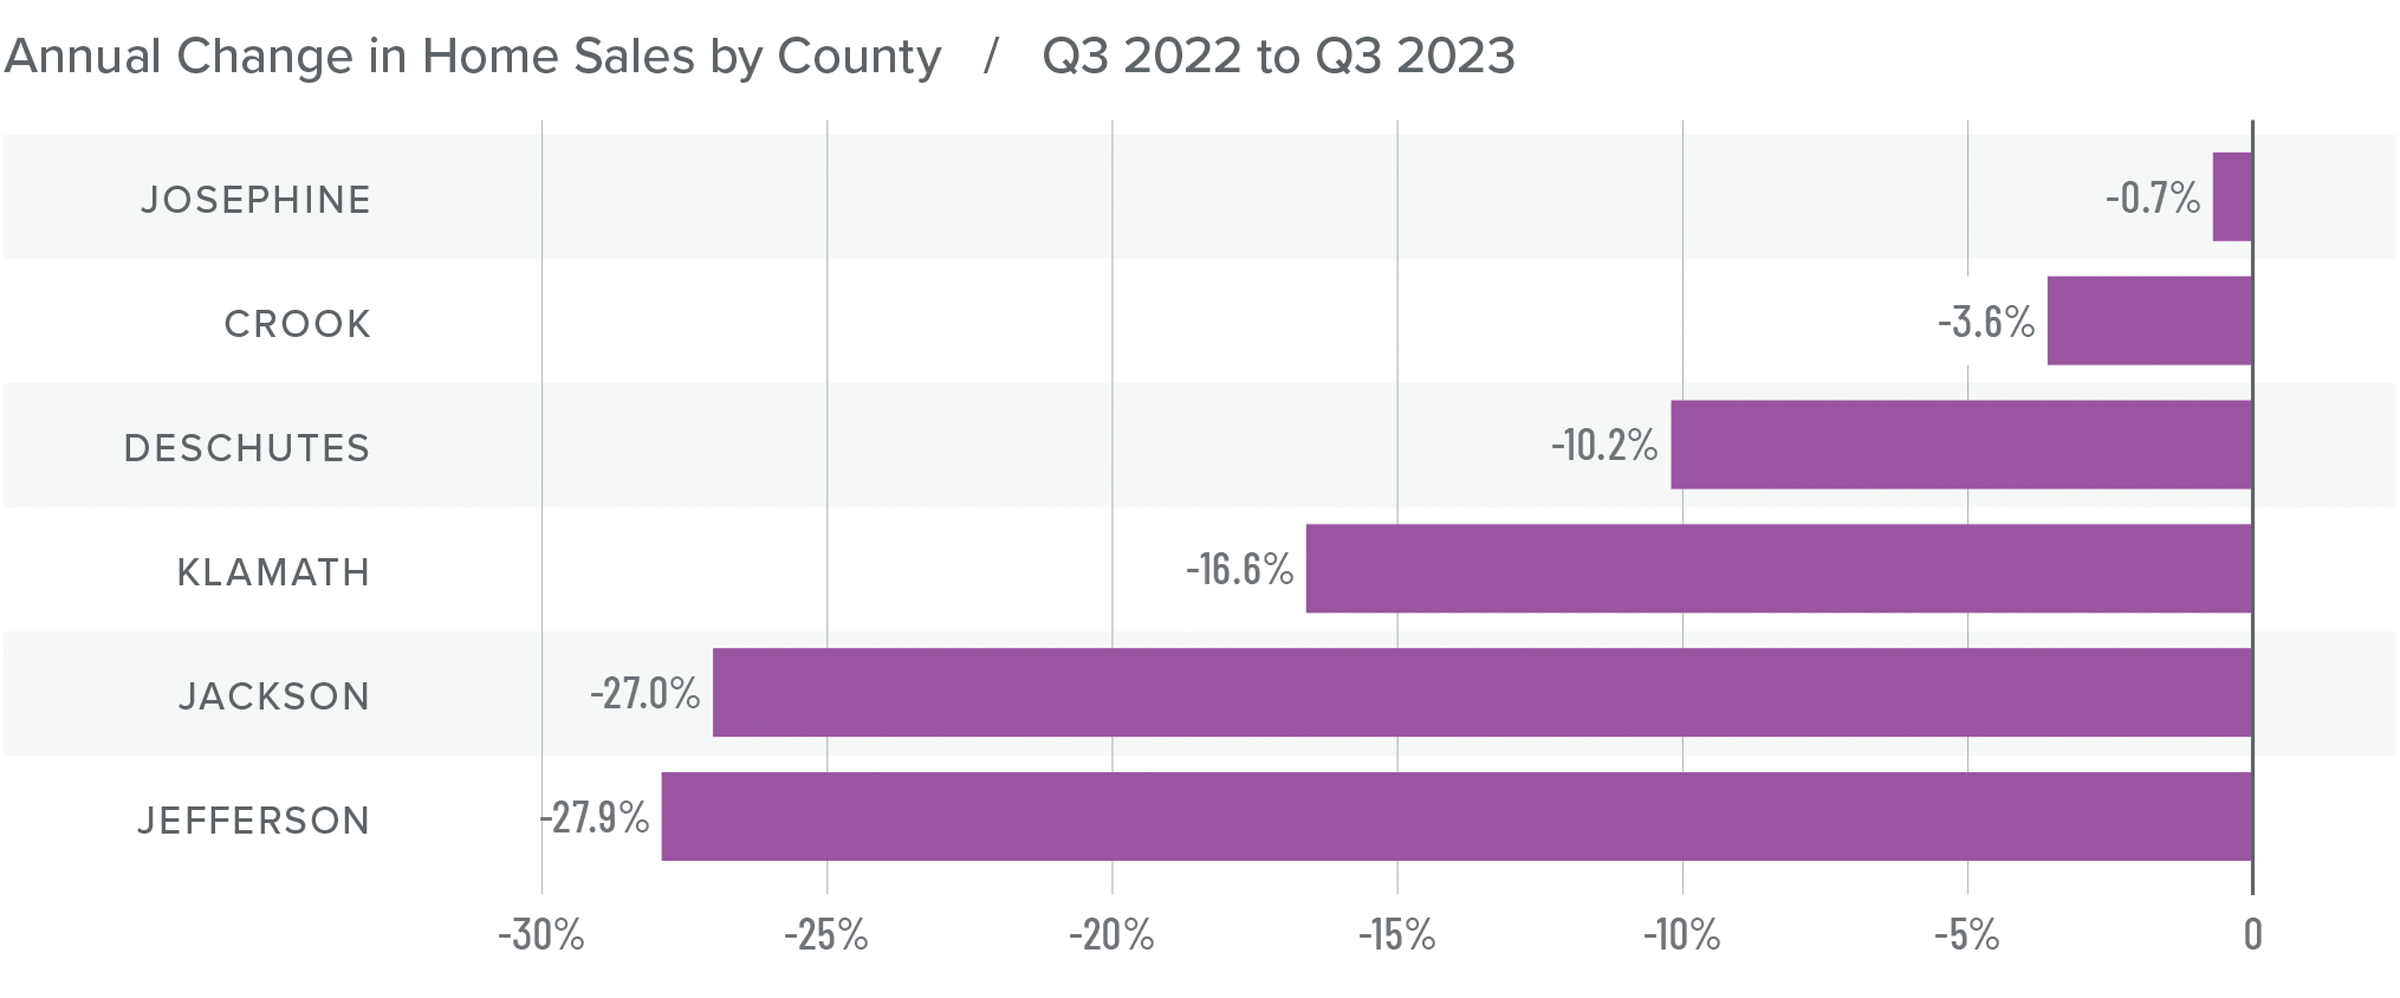 A graph showing the annual change in home sales by county in Central and Southern Oregon from Q3 2022 to Q3 2023. Josephine County had the least drastic change at -0.7%, while Jefferson County had the largest change at -27.9%. Klamath County is in the middle at -16.6 percent.